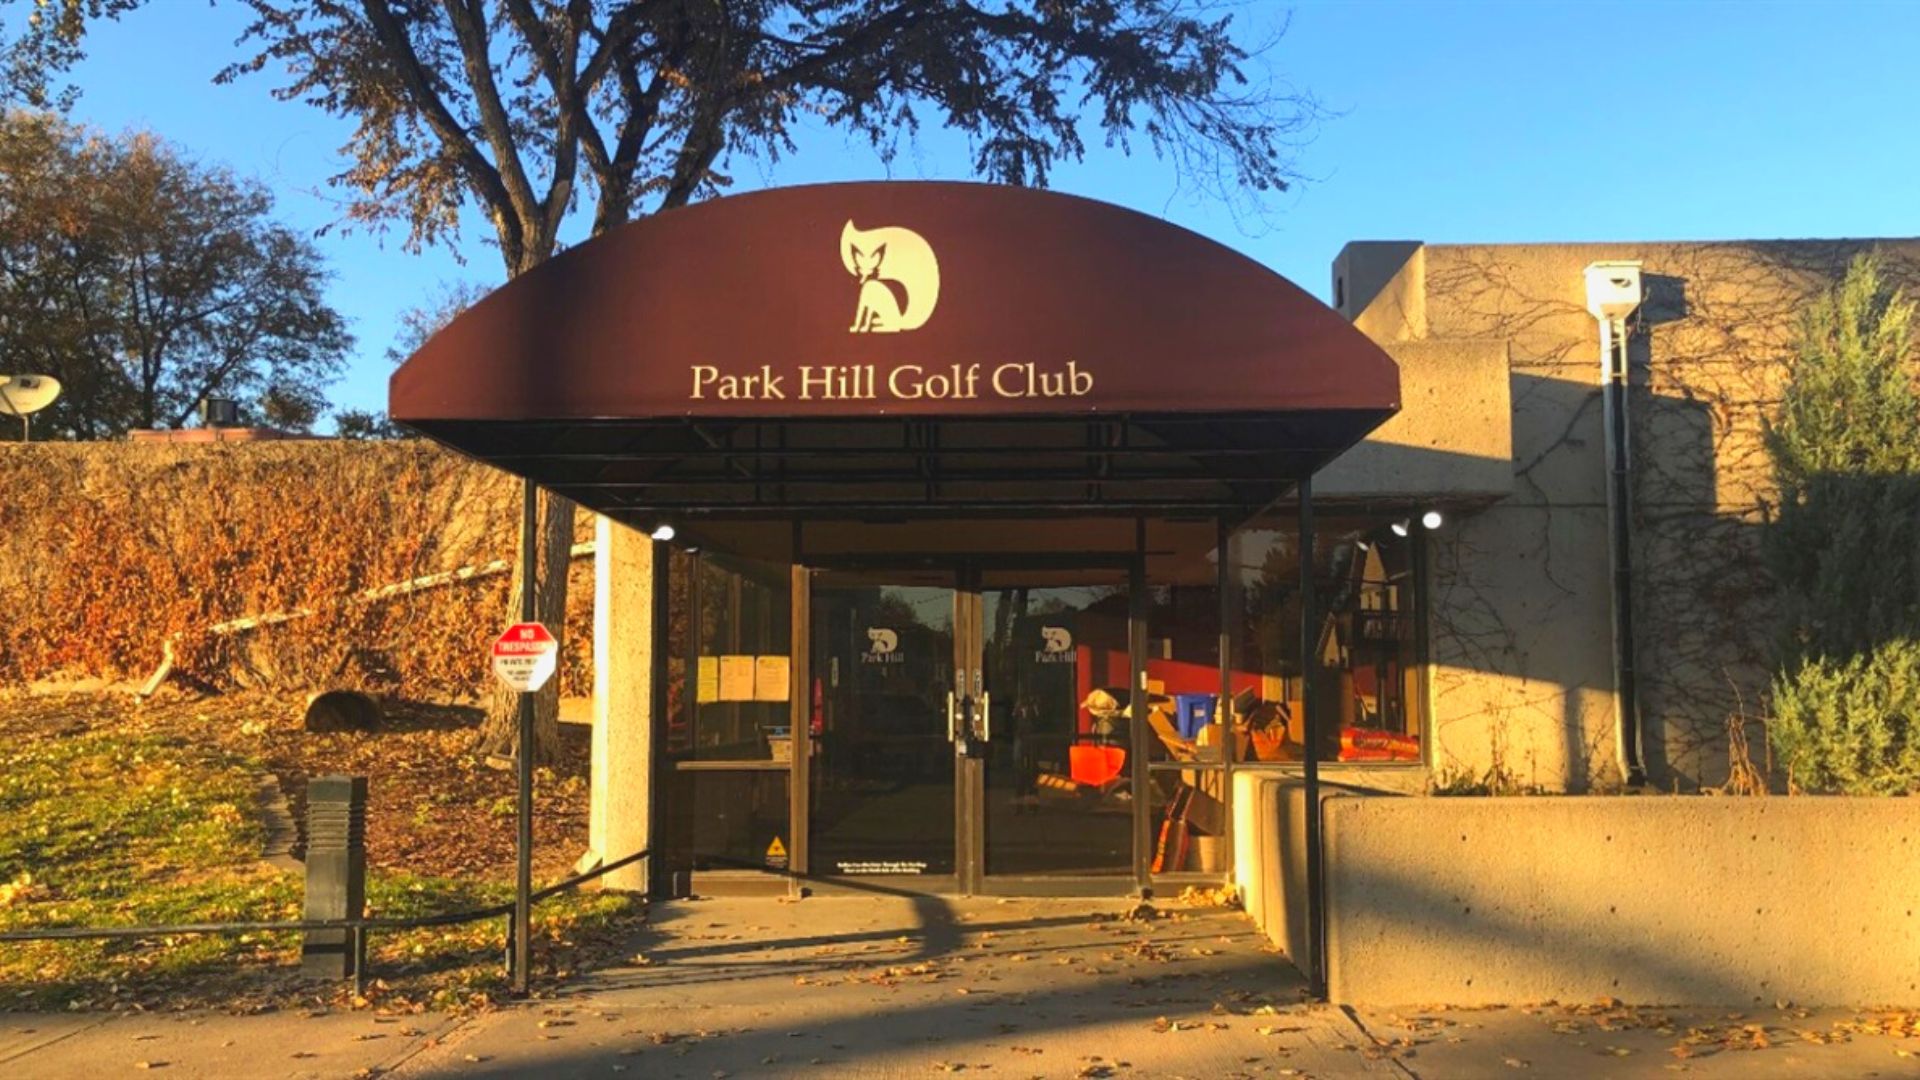 Commercial Construction project at denver's park hill course may begin